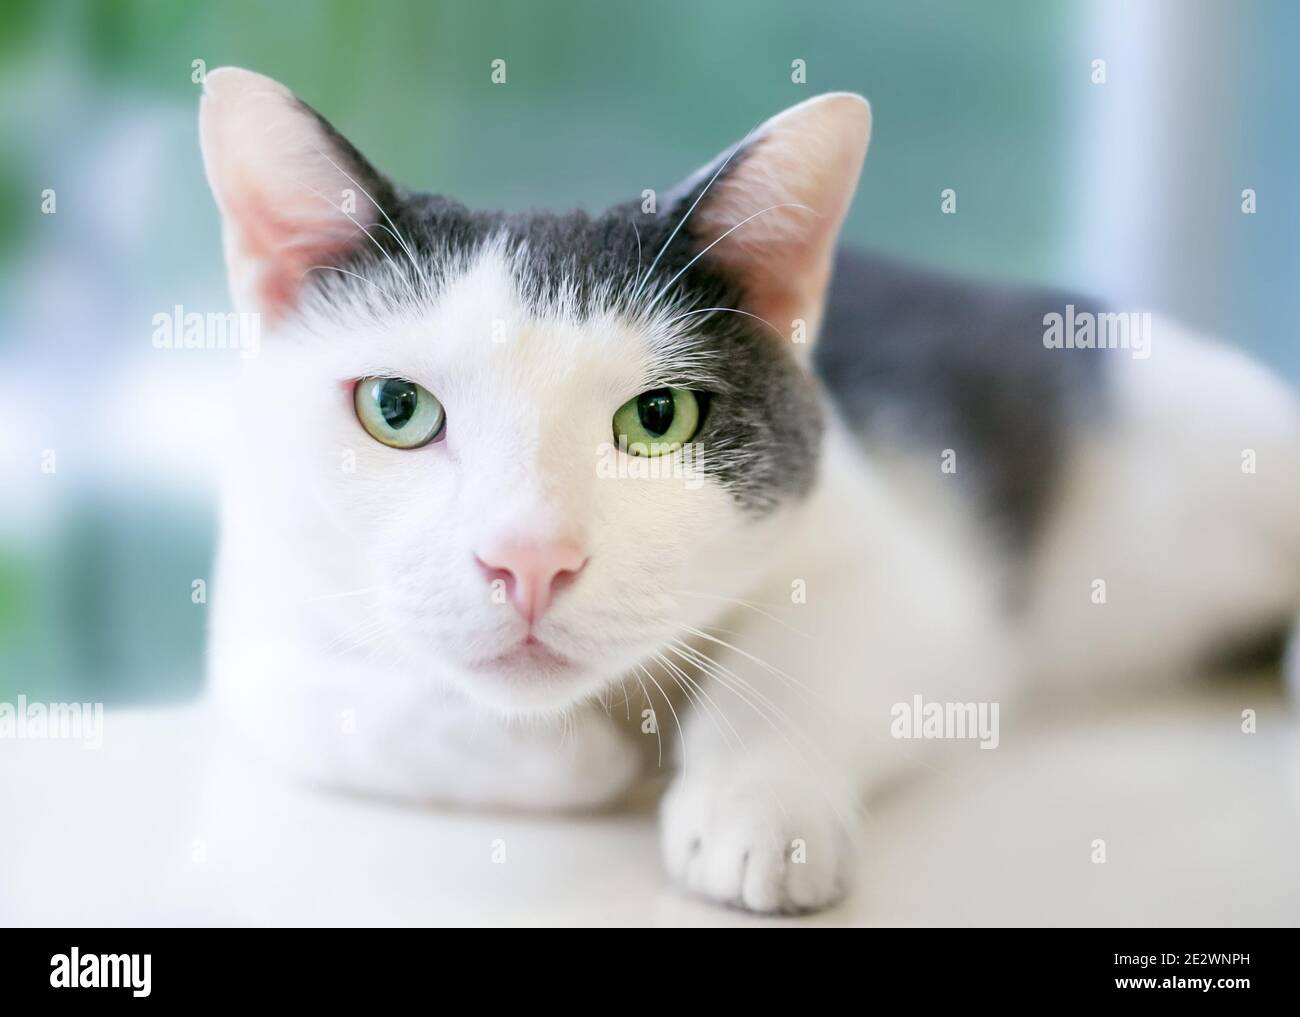 A gray and white shorthair cat with green eyes staring at the camera Stock Photo